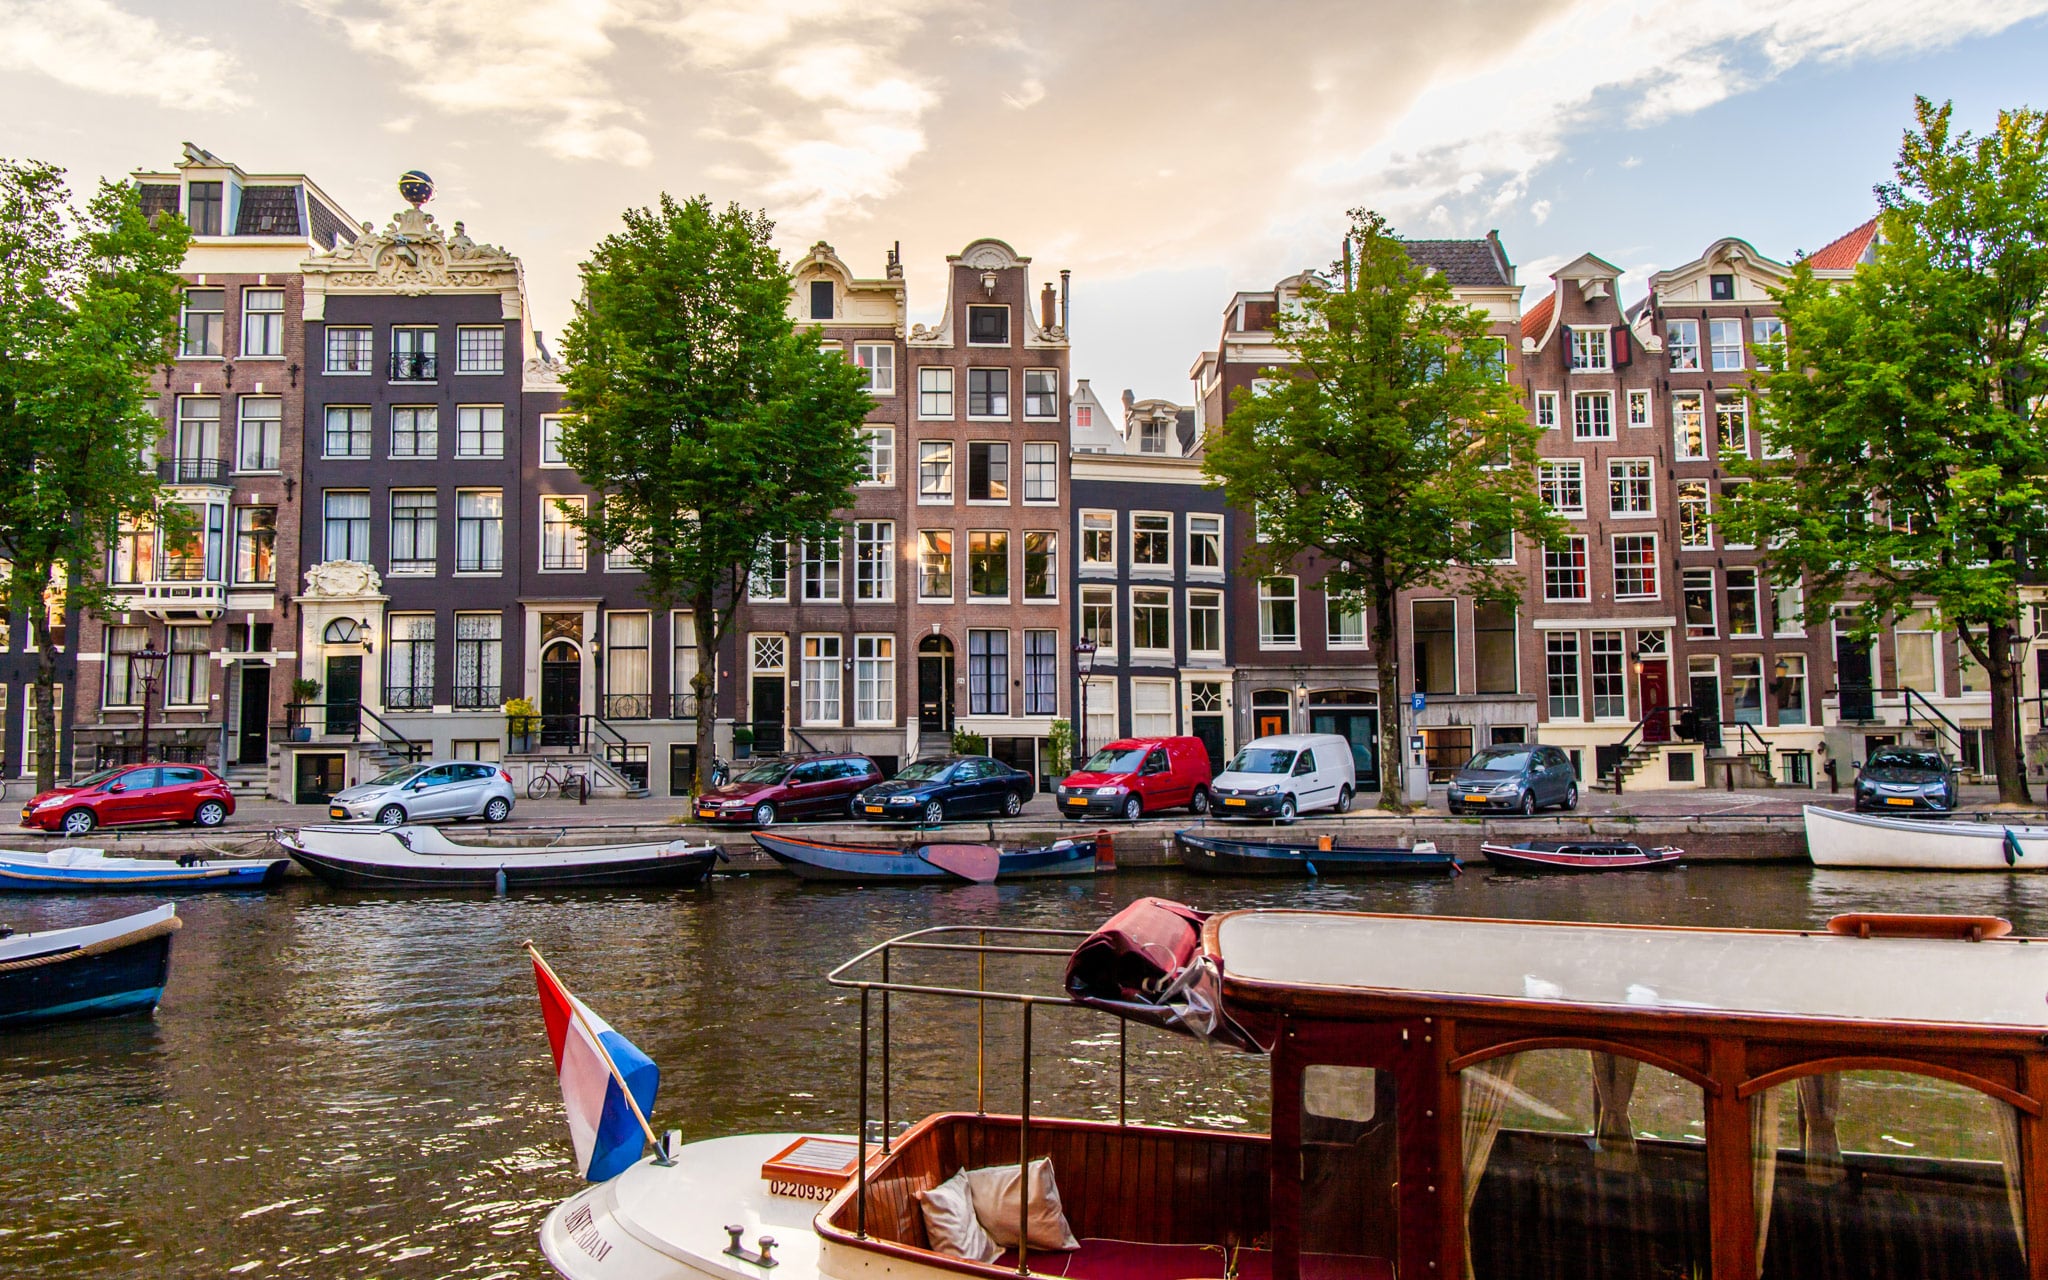 Amsterdam is renowned as one of Europe's most liberal cities